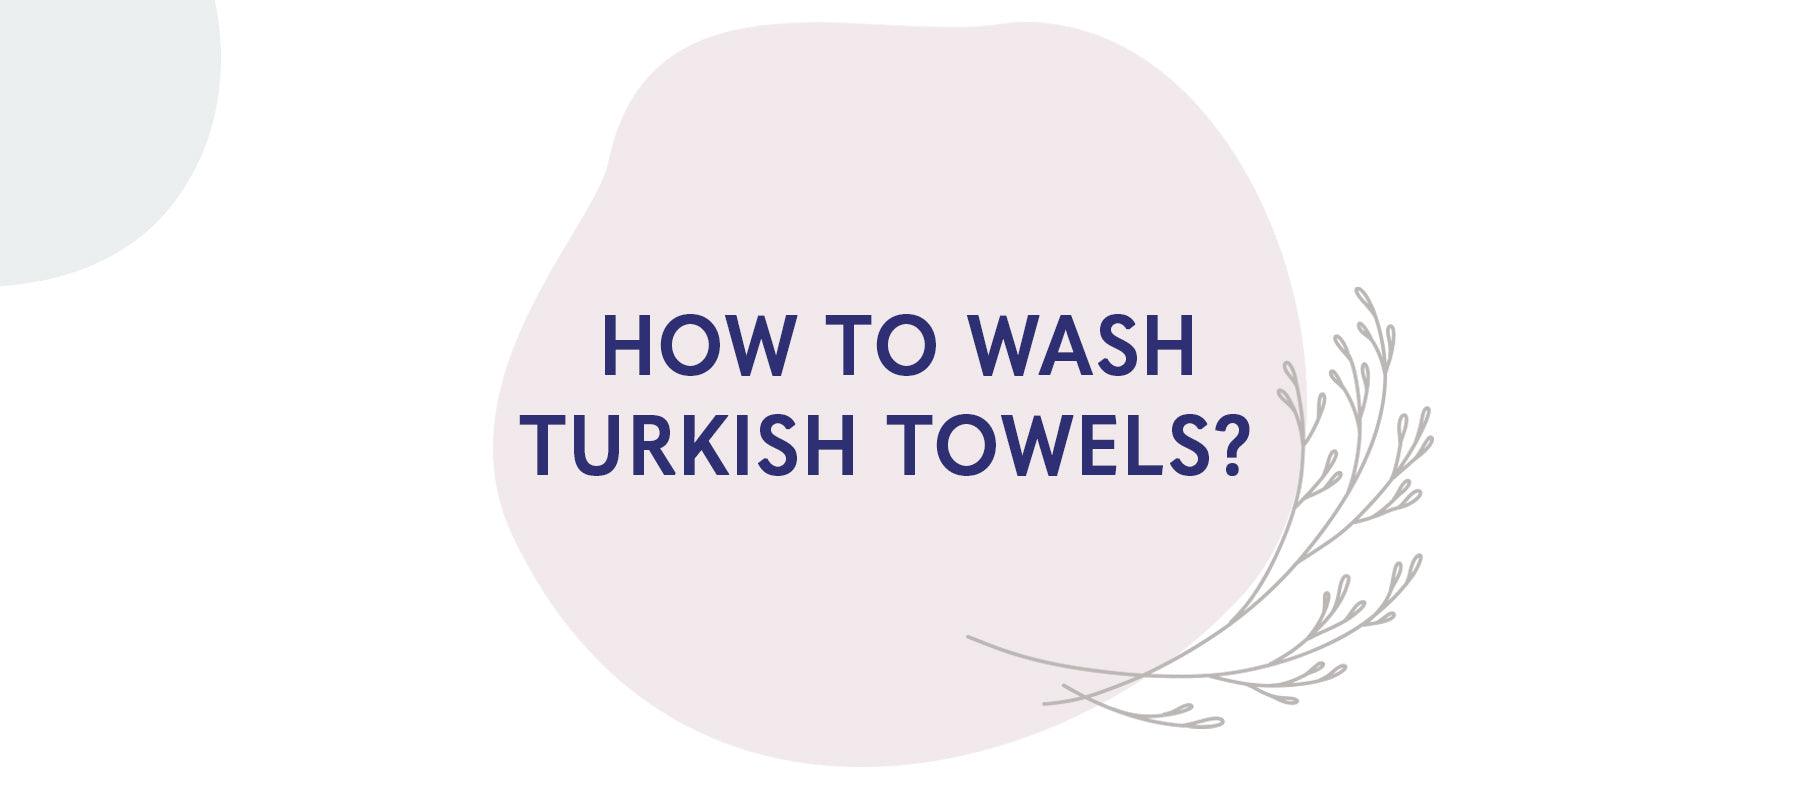 How to Wash Turkish Towels? - American Soft Linen